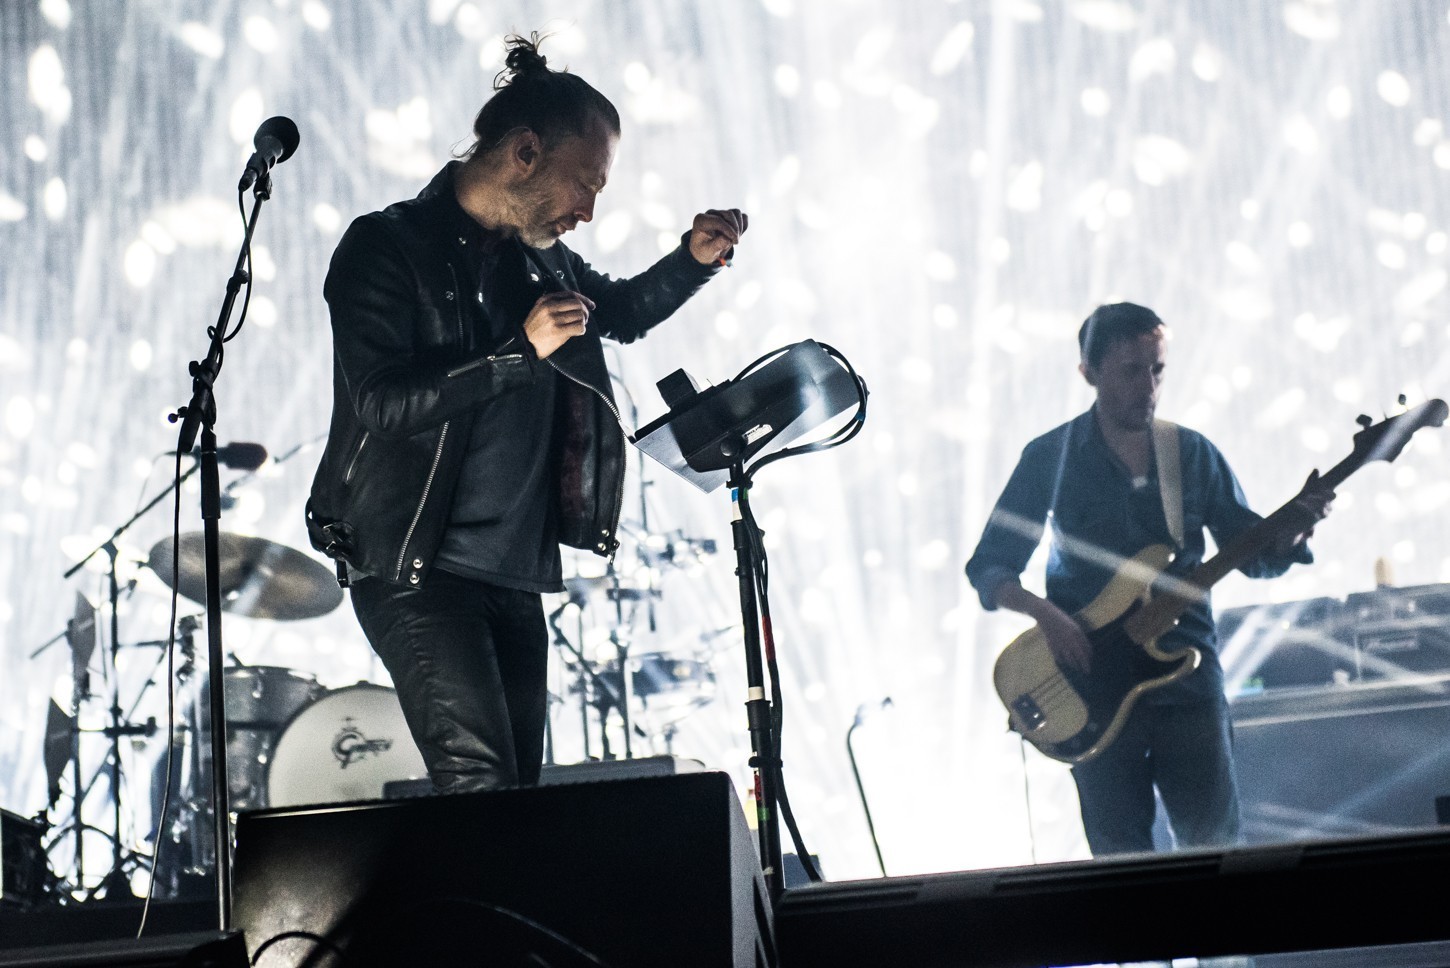 Surprisingly, Snoop Dogg did not make an appearance during Radiohead's set. Maybe he bailed because of all the sound issues? - MATHEW TUCCIARONE